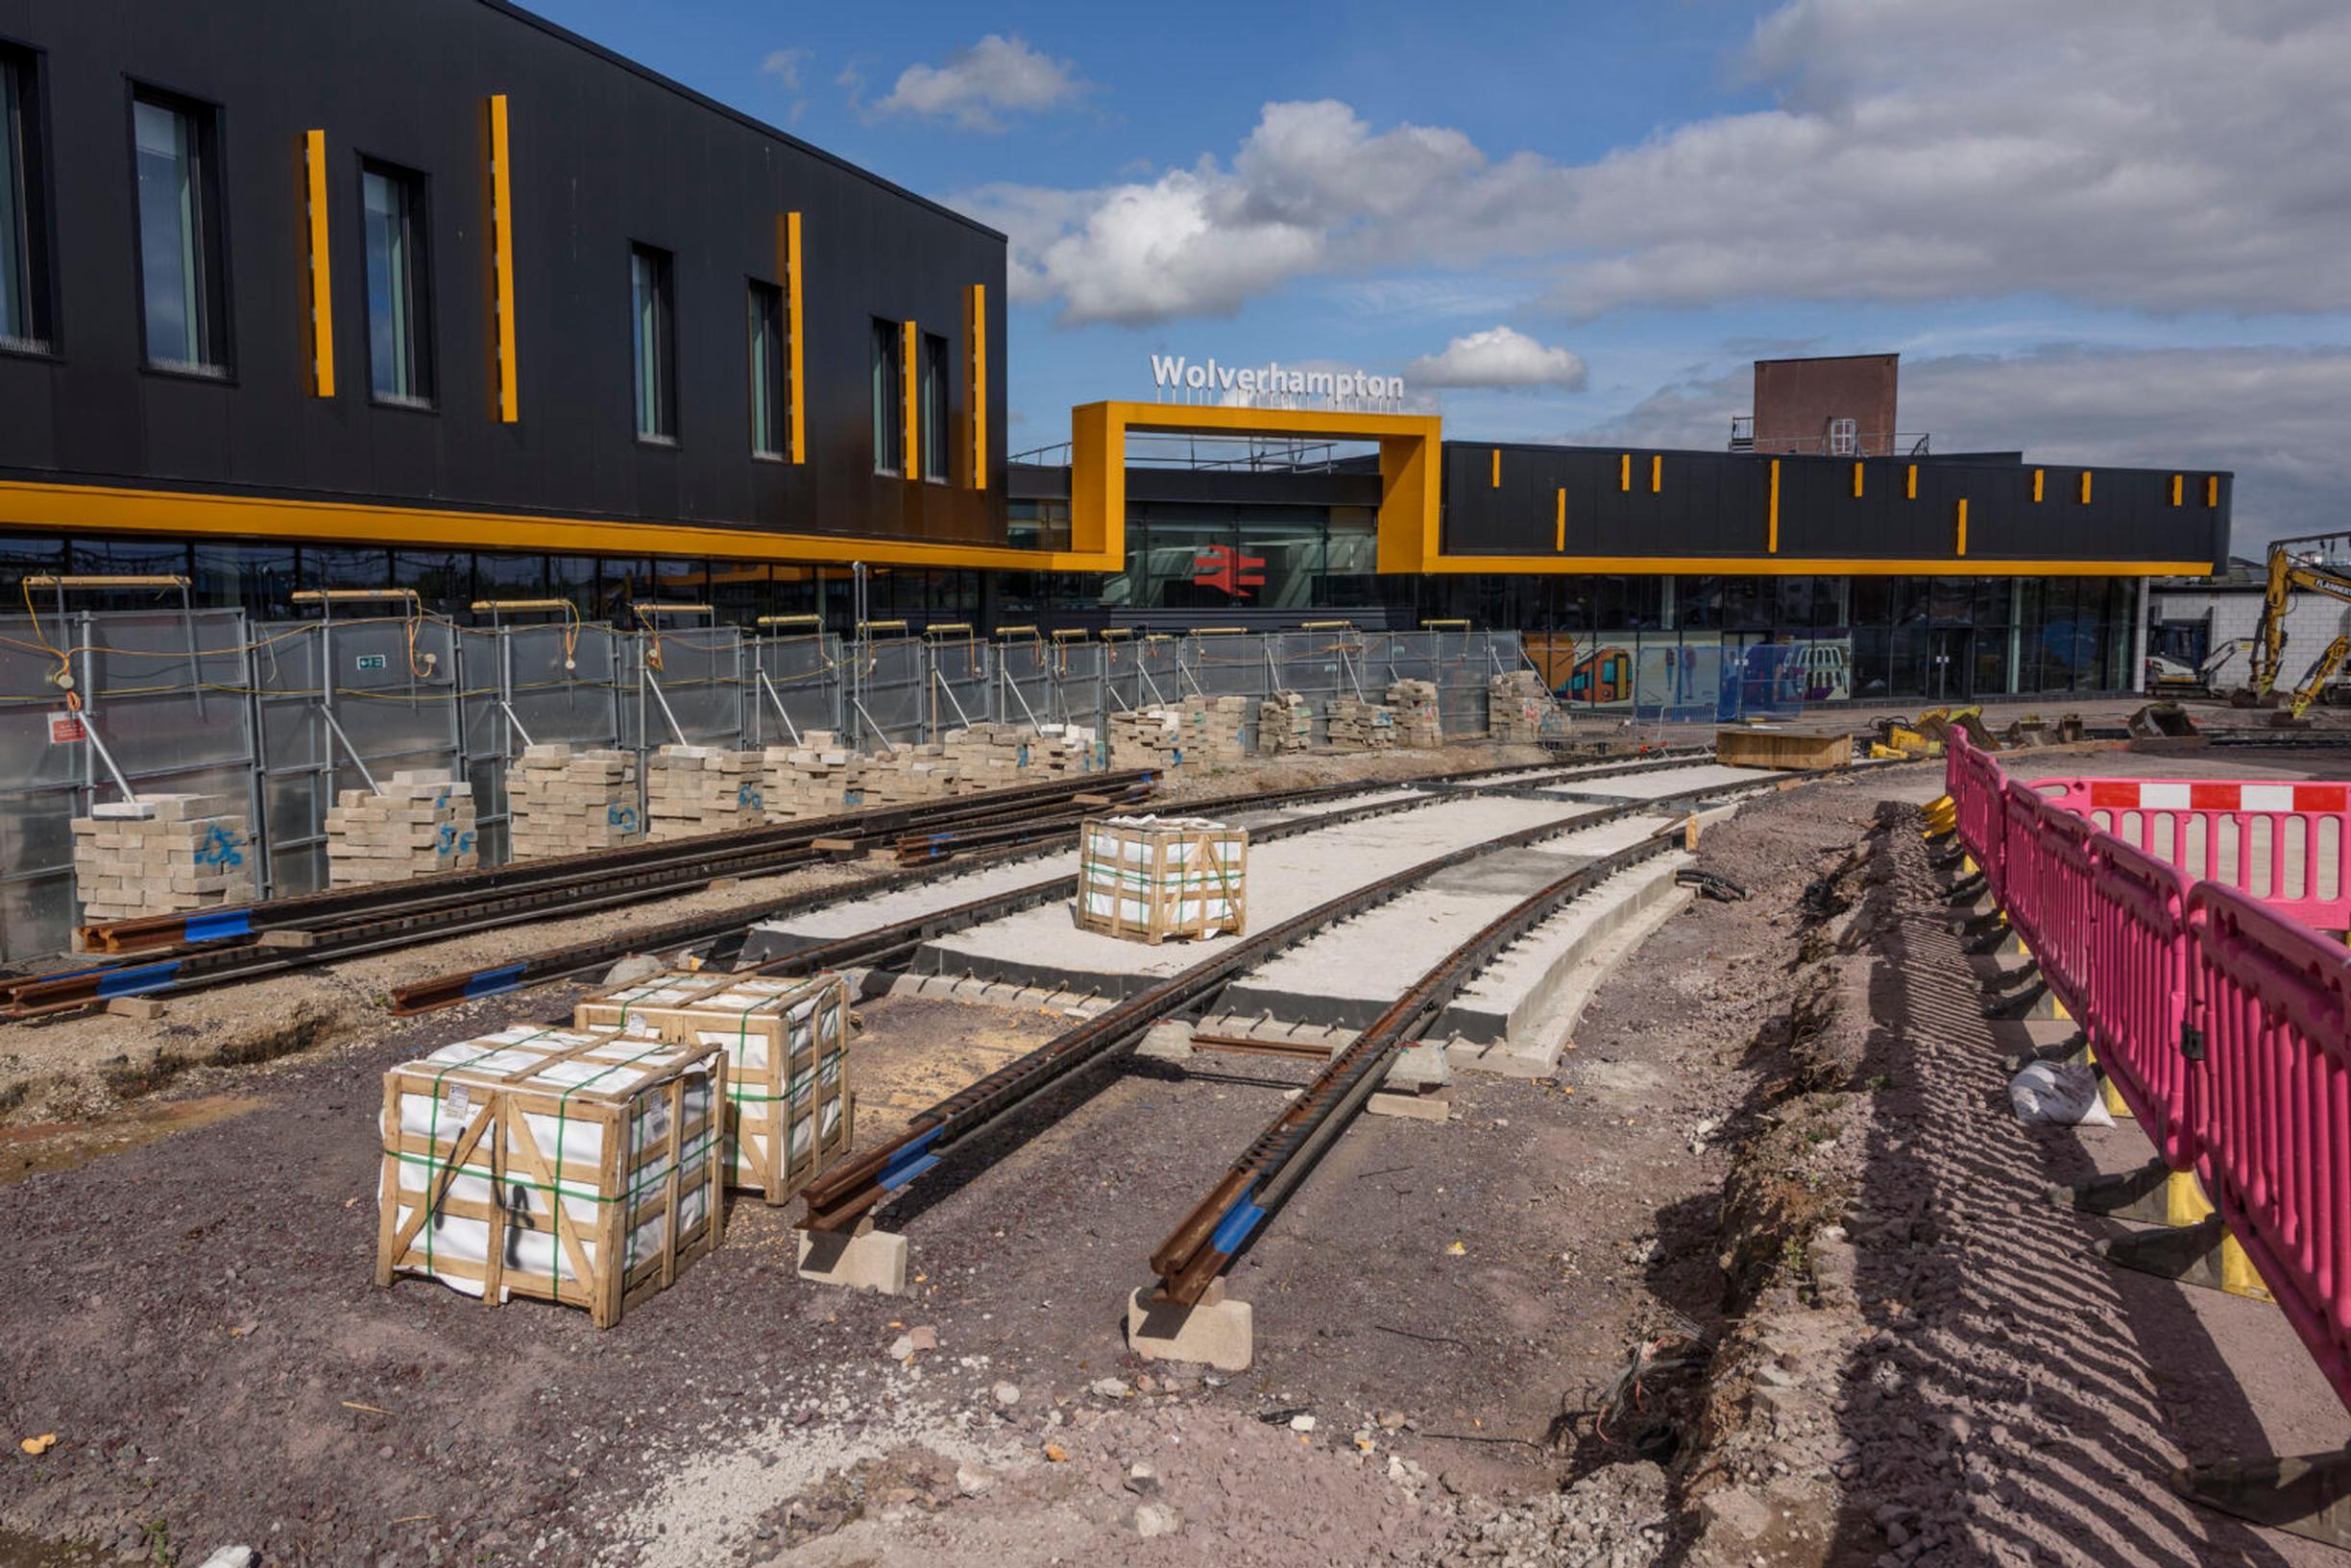 The first stretch of tram tracks in Wolverhampton city centre